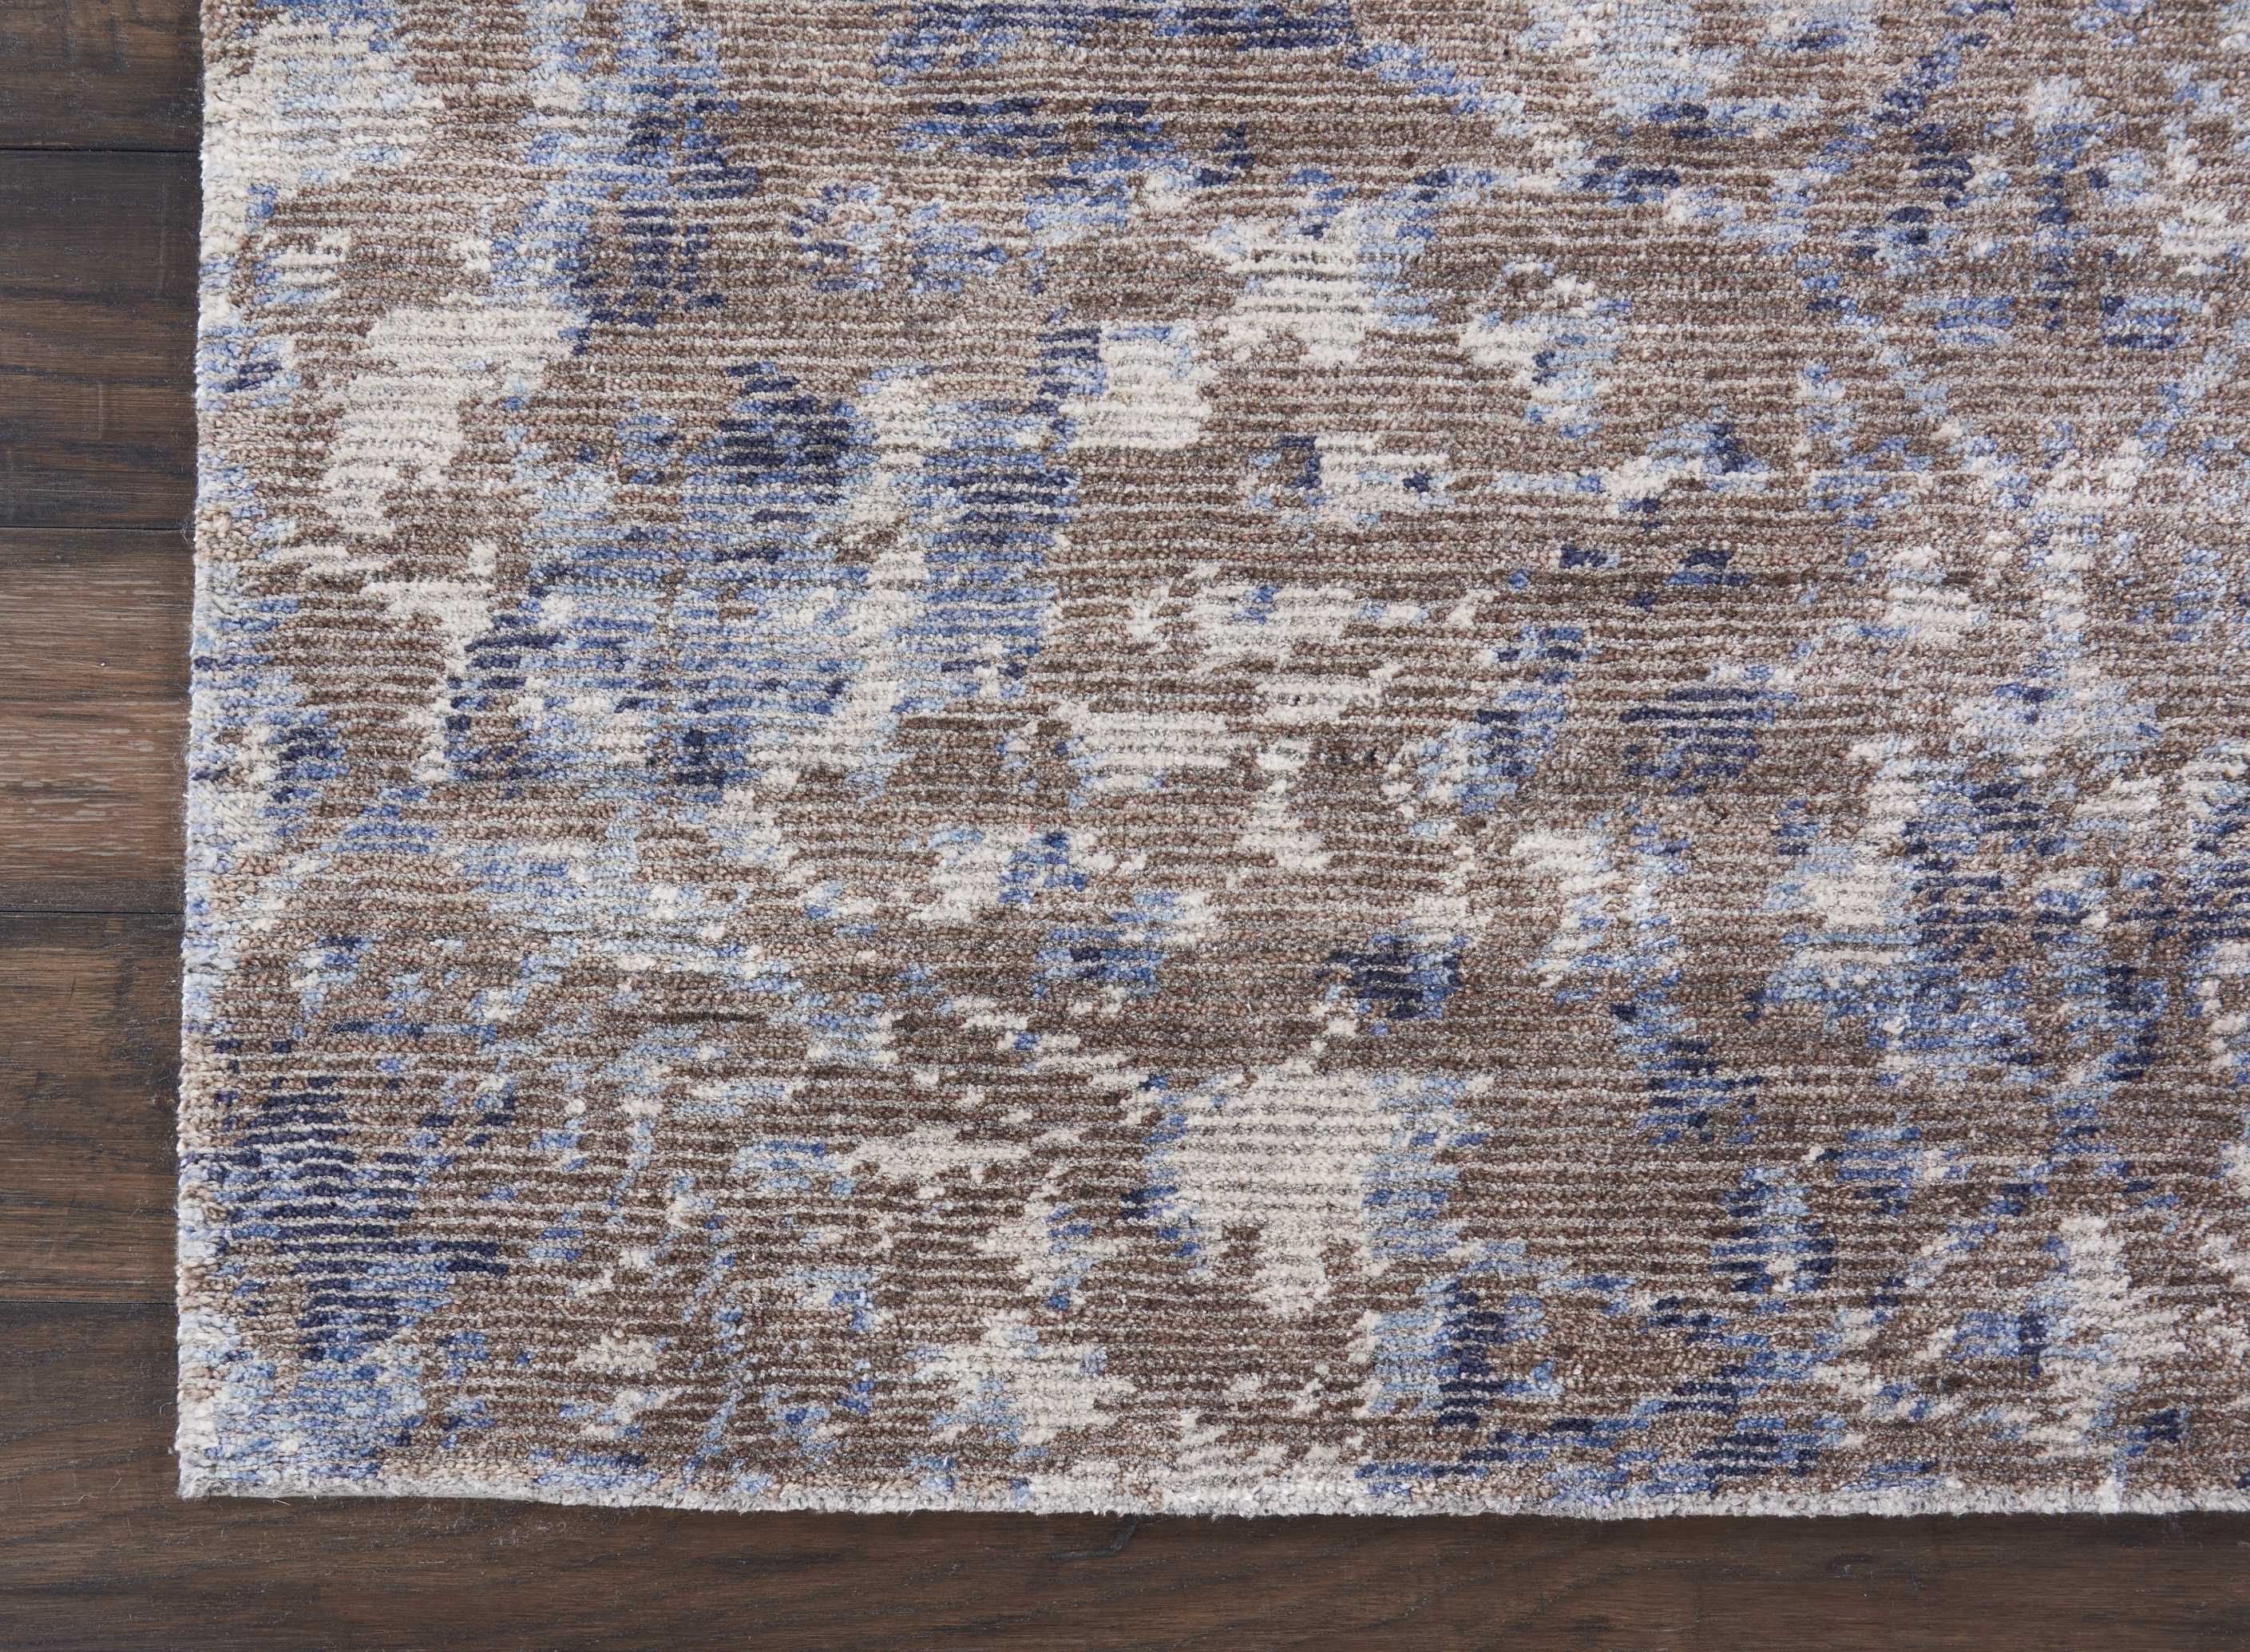 Abstractly patterned rug blends vintage and modern aesthetics seamlessly.